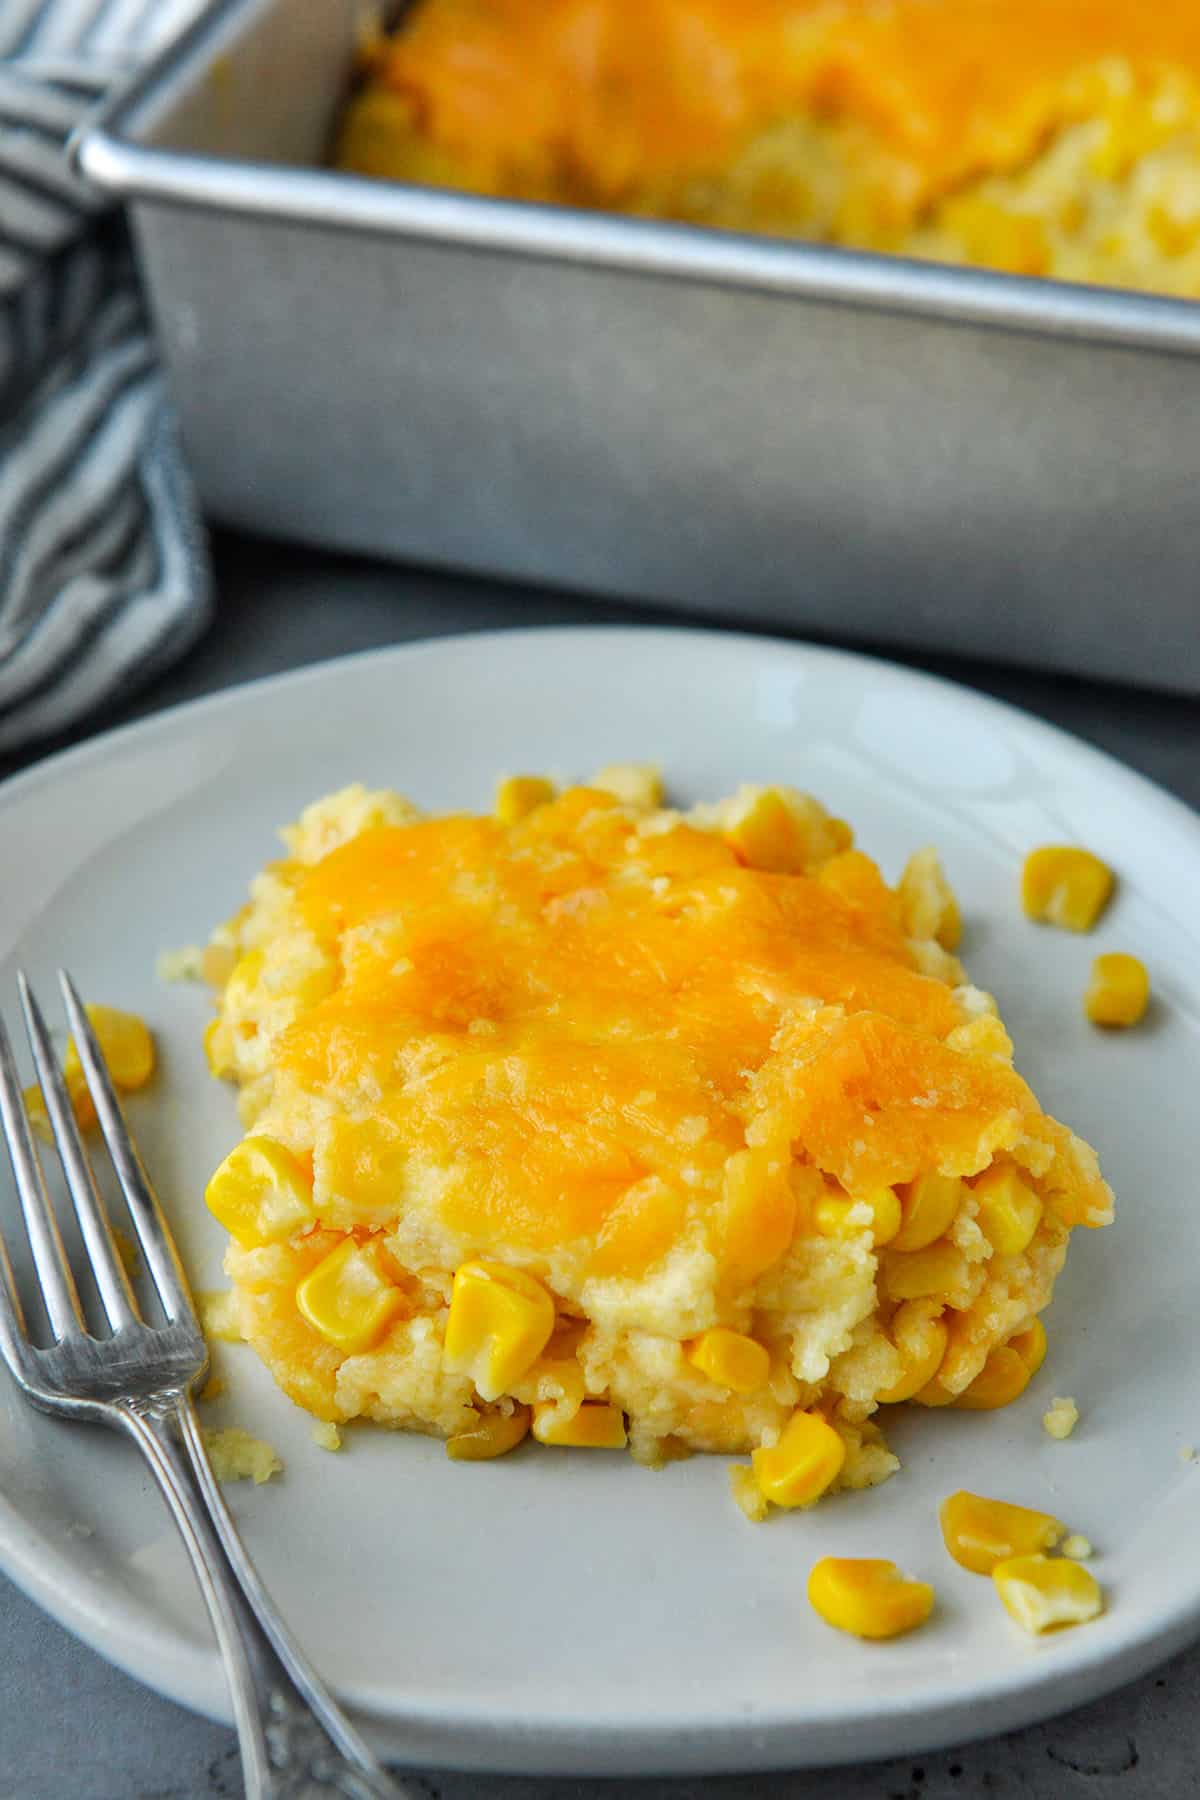 Corn casserole on a plate with a fork and the baking dish in the background.